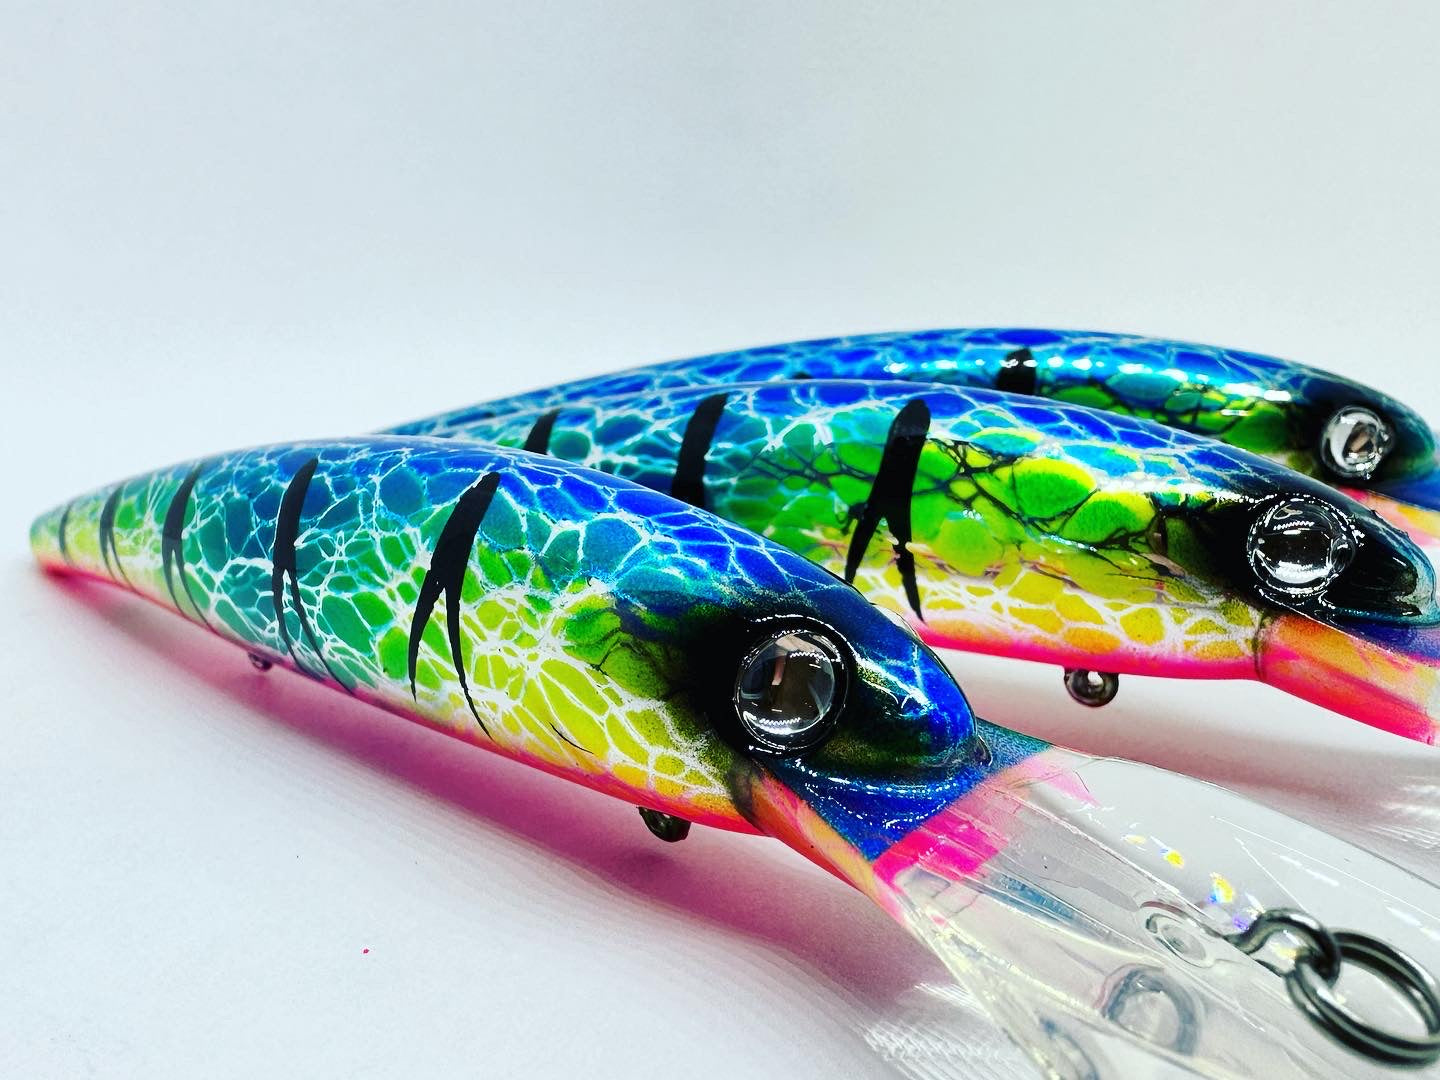 Custom Bandit Crankbait - Tropical Thunder by Vertical Jigs and Lures